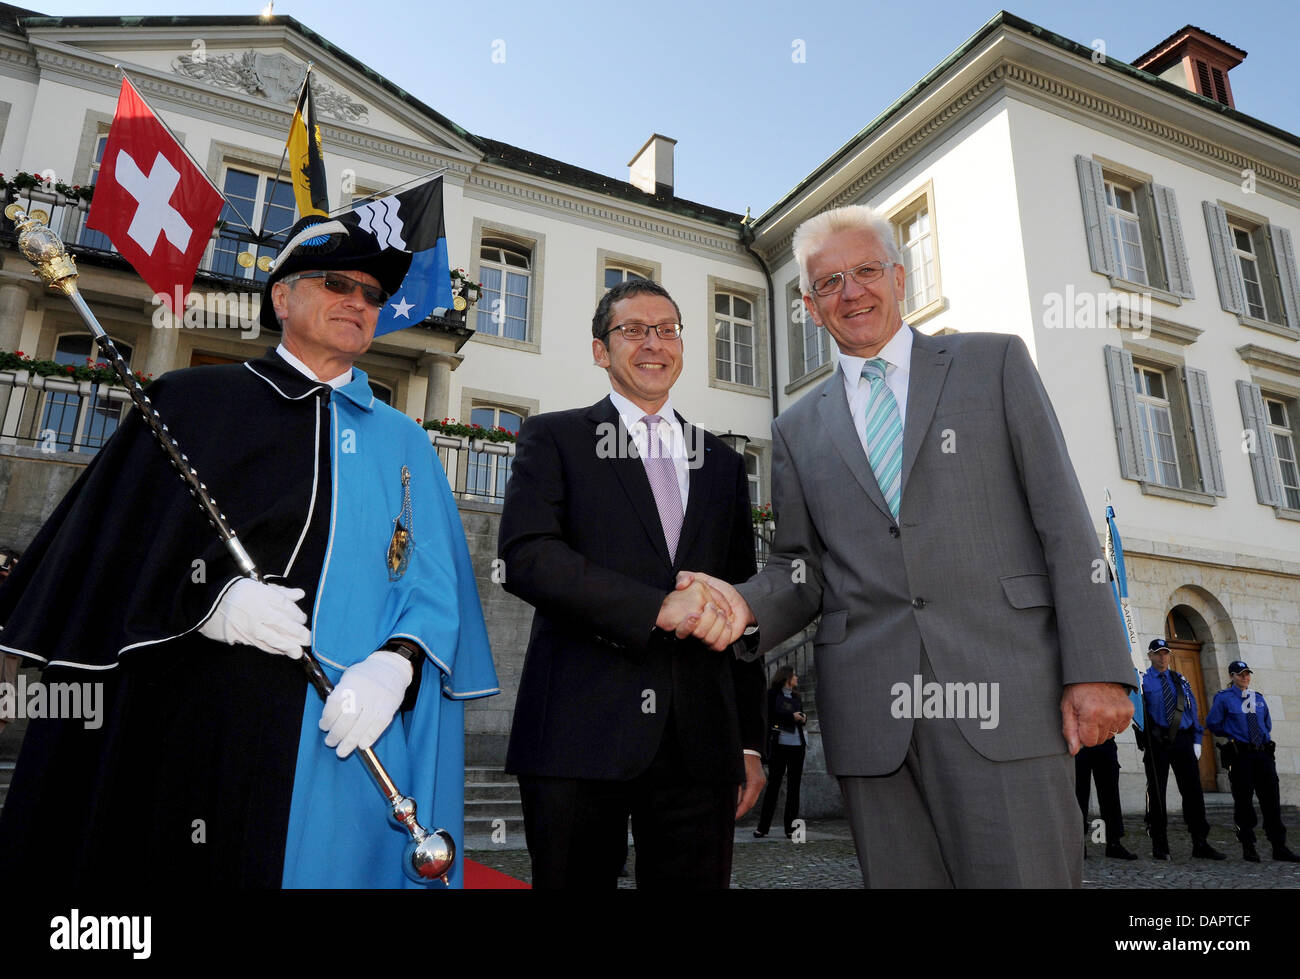 Governor of Aargau, Urs Hofmann (M), and Premier of Baden-Wuerttemberg Winfried Kretschmann (R) shake hands next to a so-called 'Weibel' in front of the cantonal government building in Aarau, Switzerland, 31 August 2011. In Aarau, Kretschmann was welcomed by the cantonal government to discuss the economic cooperation, questions of citizens' initiatives and cooperations in the healt Stock Photo